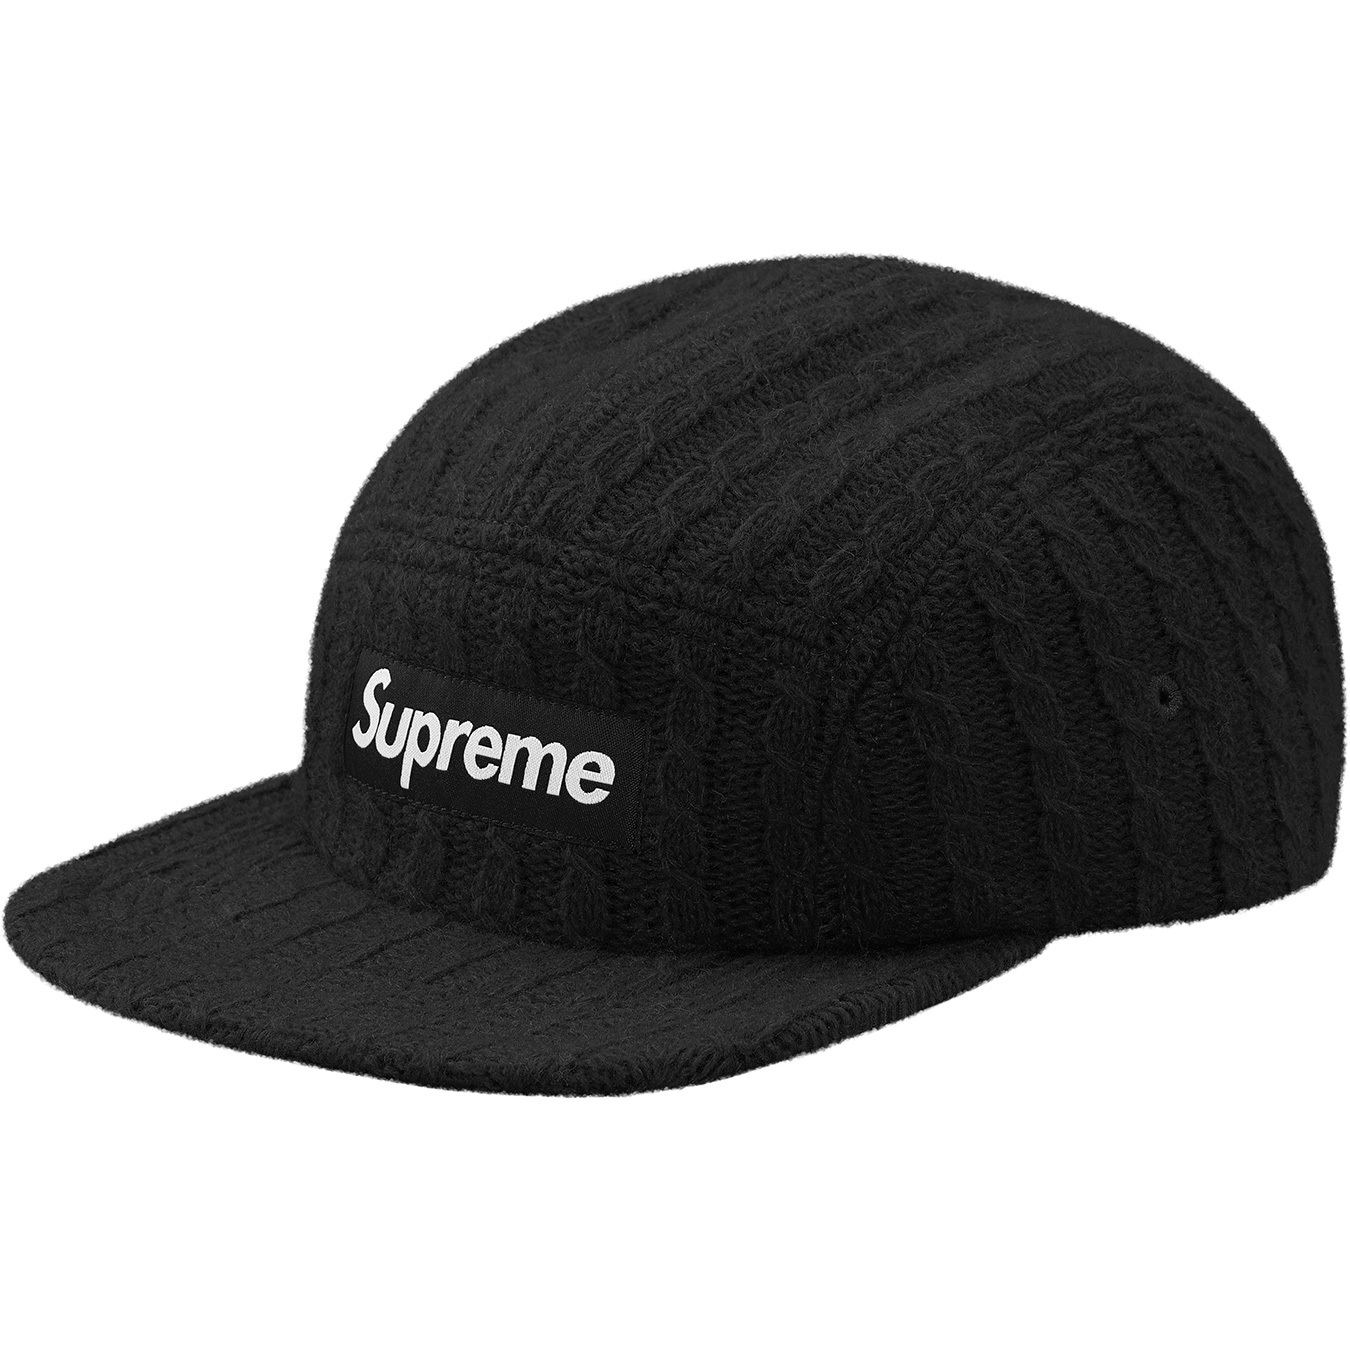 Supreme Fitted Cable Knit Camp Cap Black